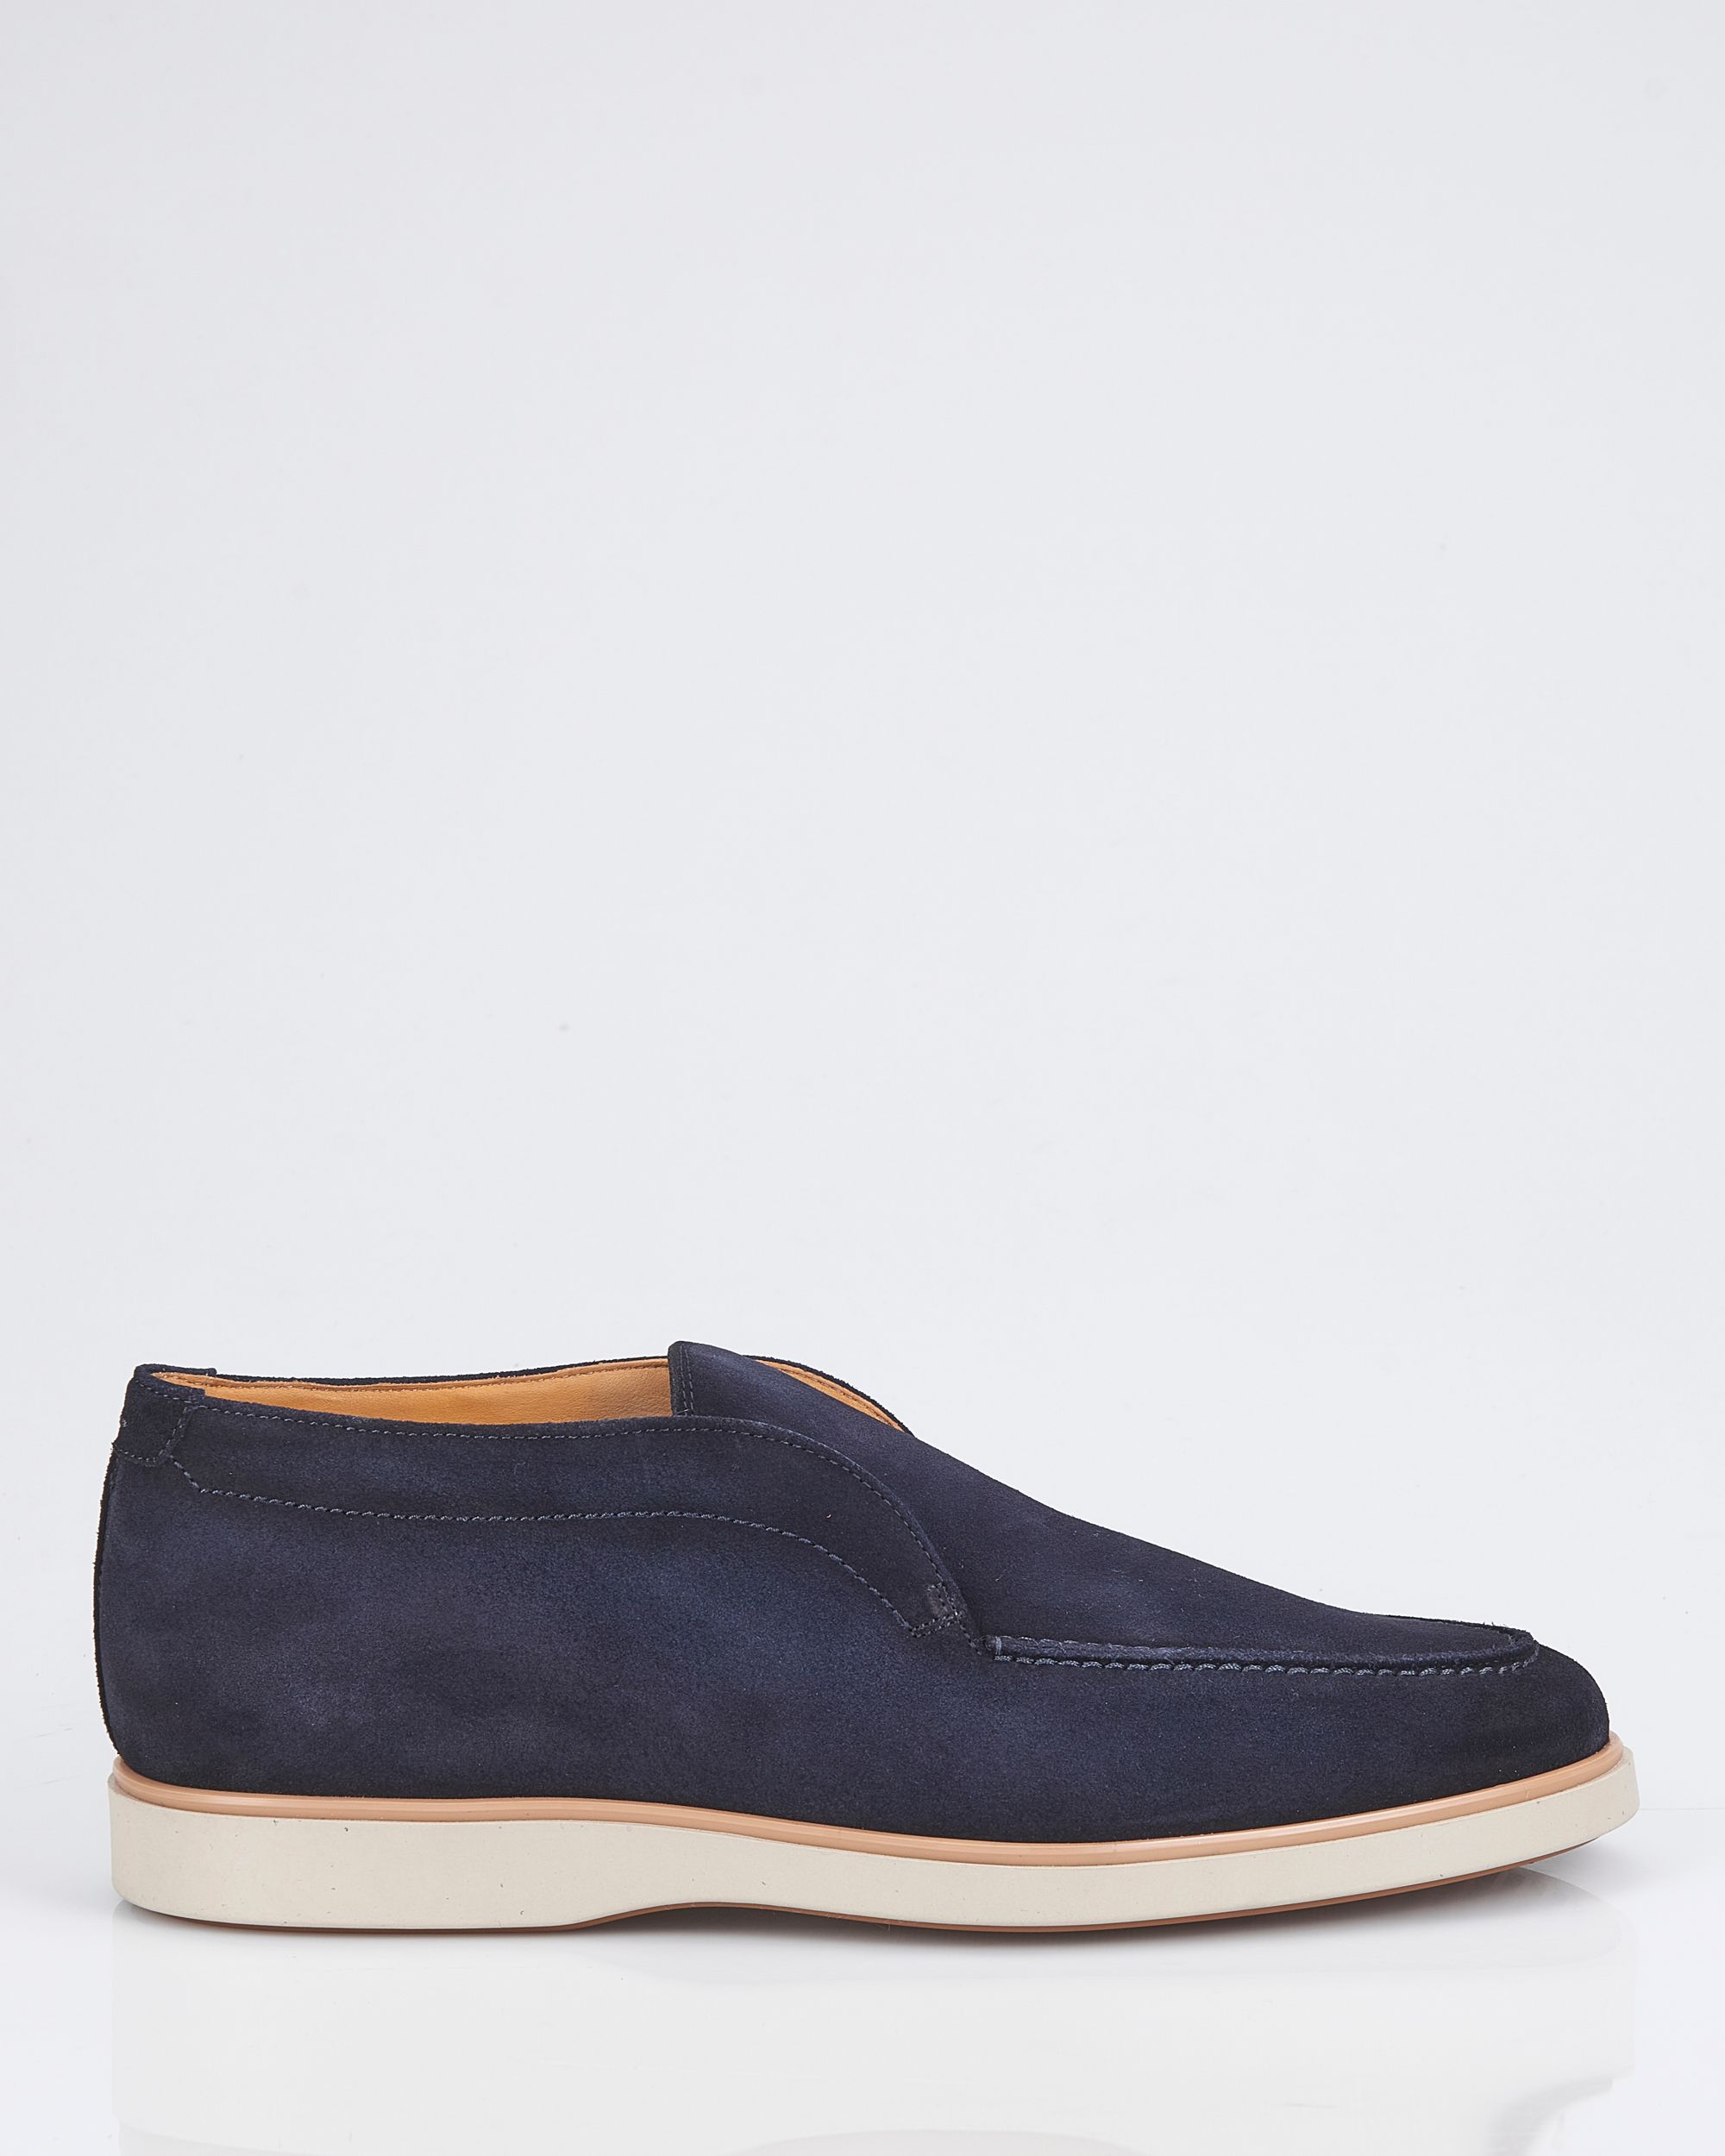 Magnanni Loafers Donker blauw 086794-001-41